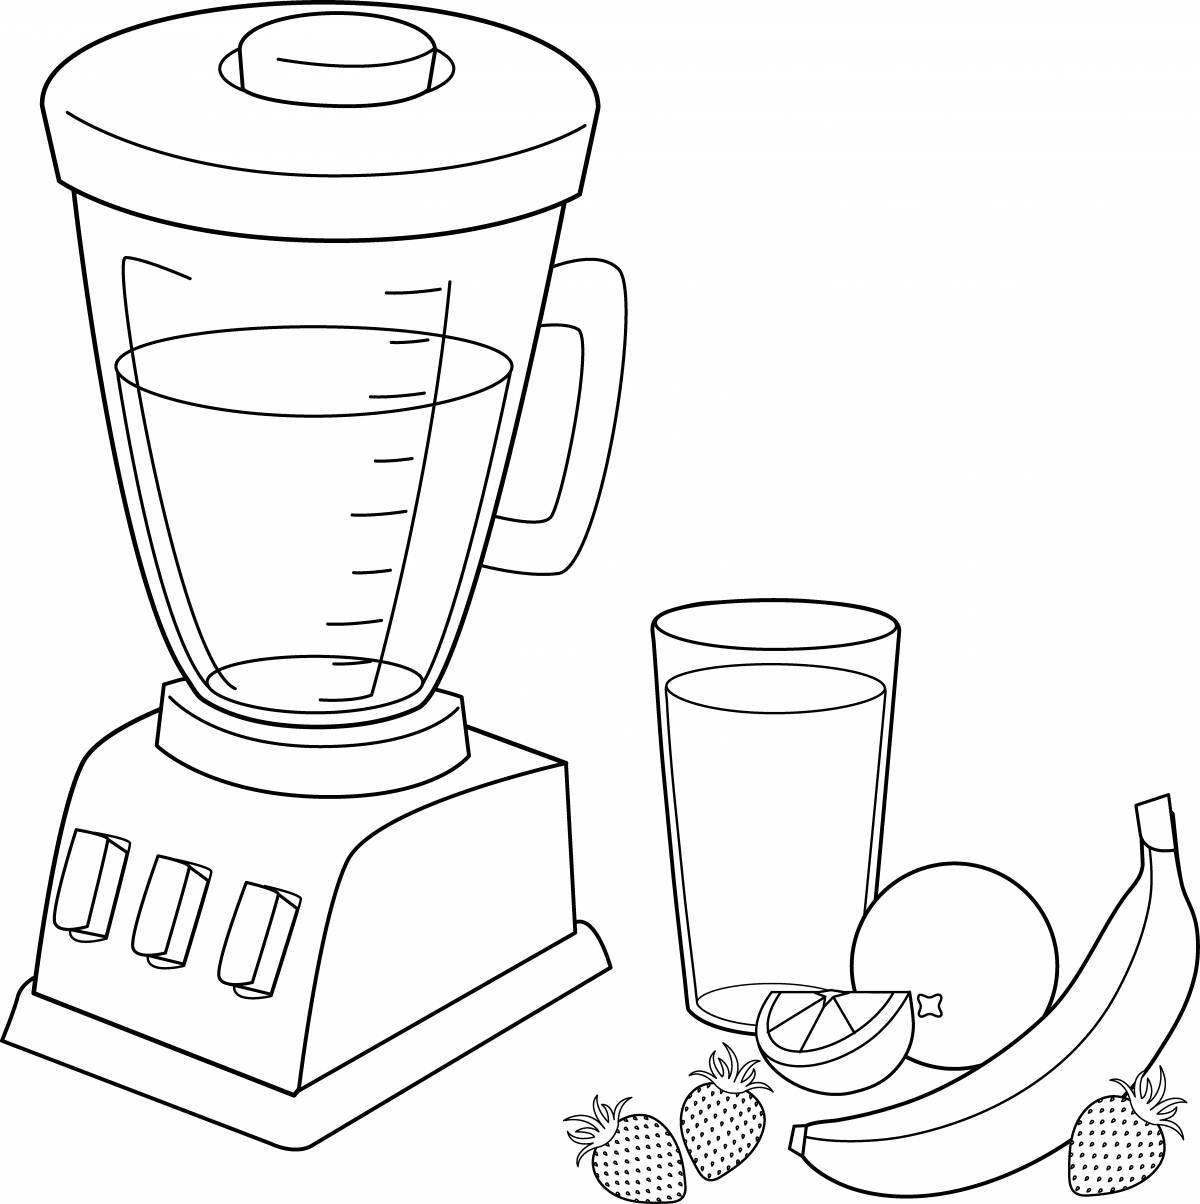 Colorful household appliances coloring book for 2-3 year olds